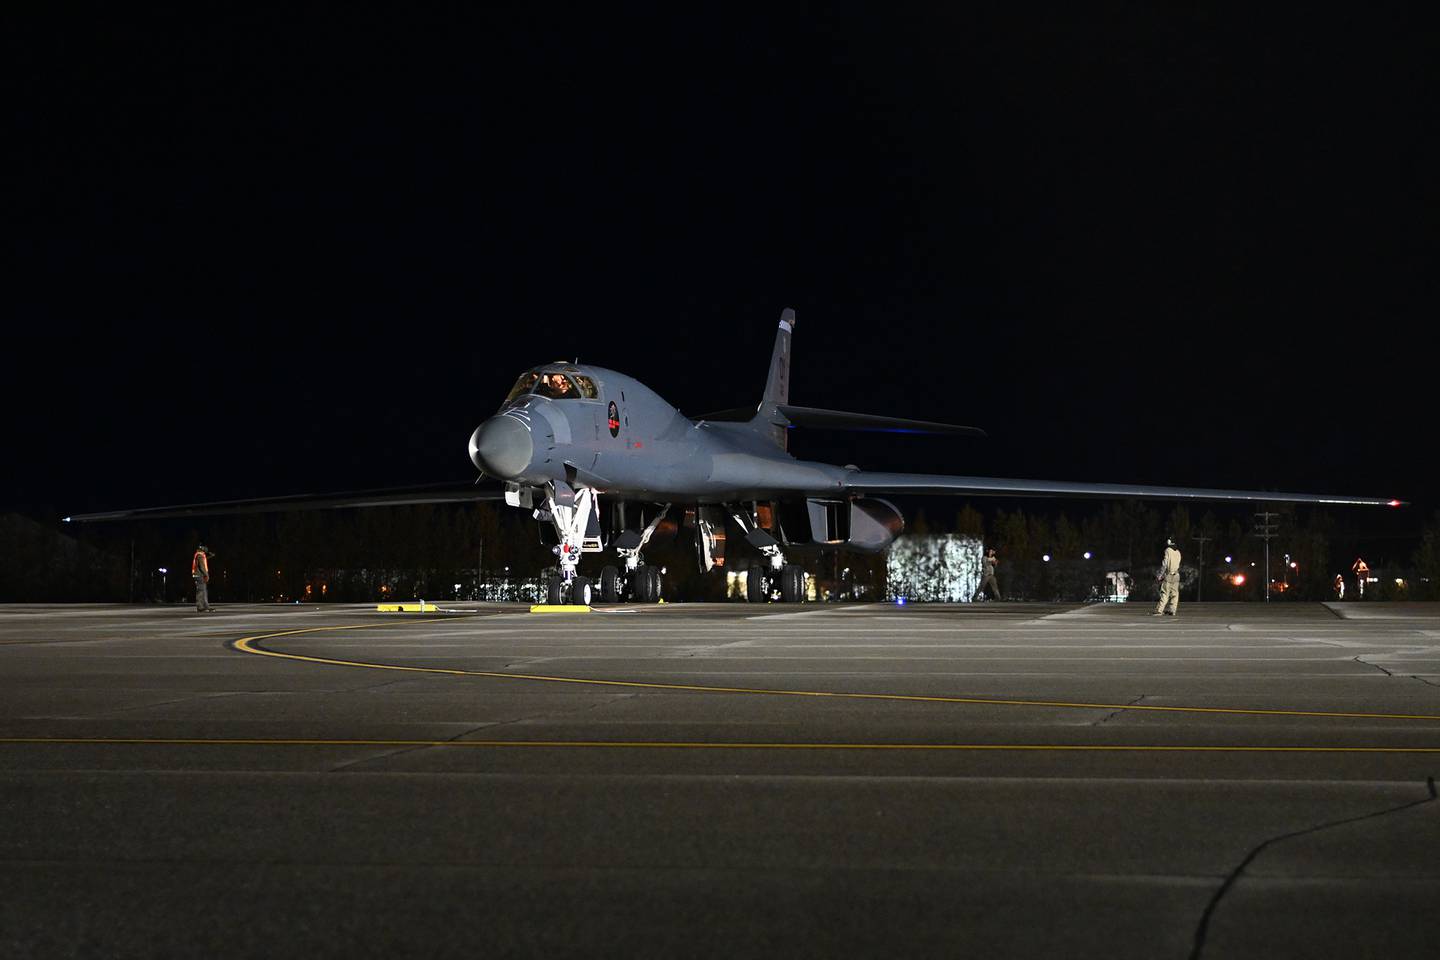 A B-1 Lancer arrives at Eielson Air Force Base, Alaska, Sept. 10, 2020, in support of a Bomber Task Force mission. The initial mission flew in international airspace near Wrangel Island and the New Siberian Islands off the Russian coast.